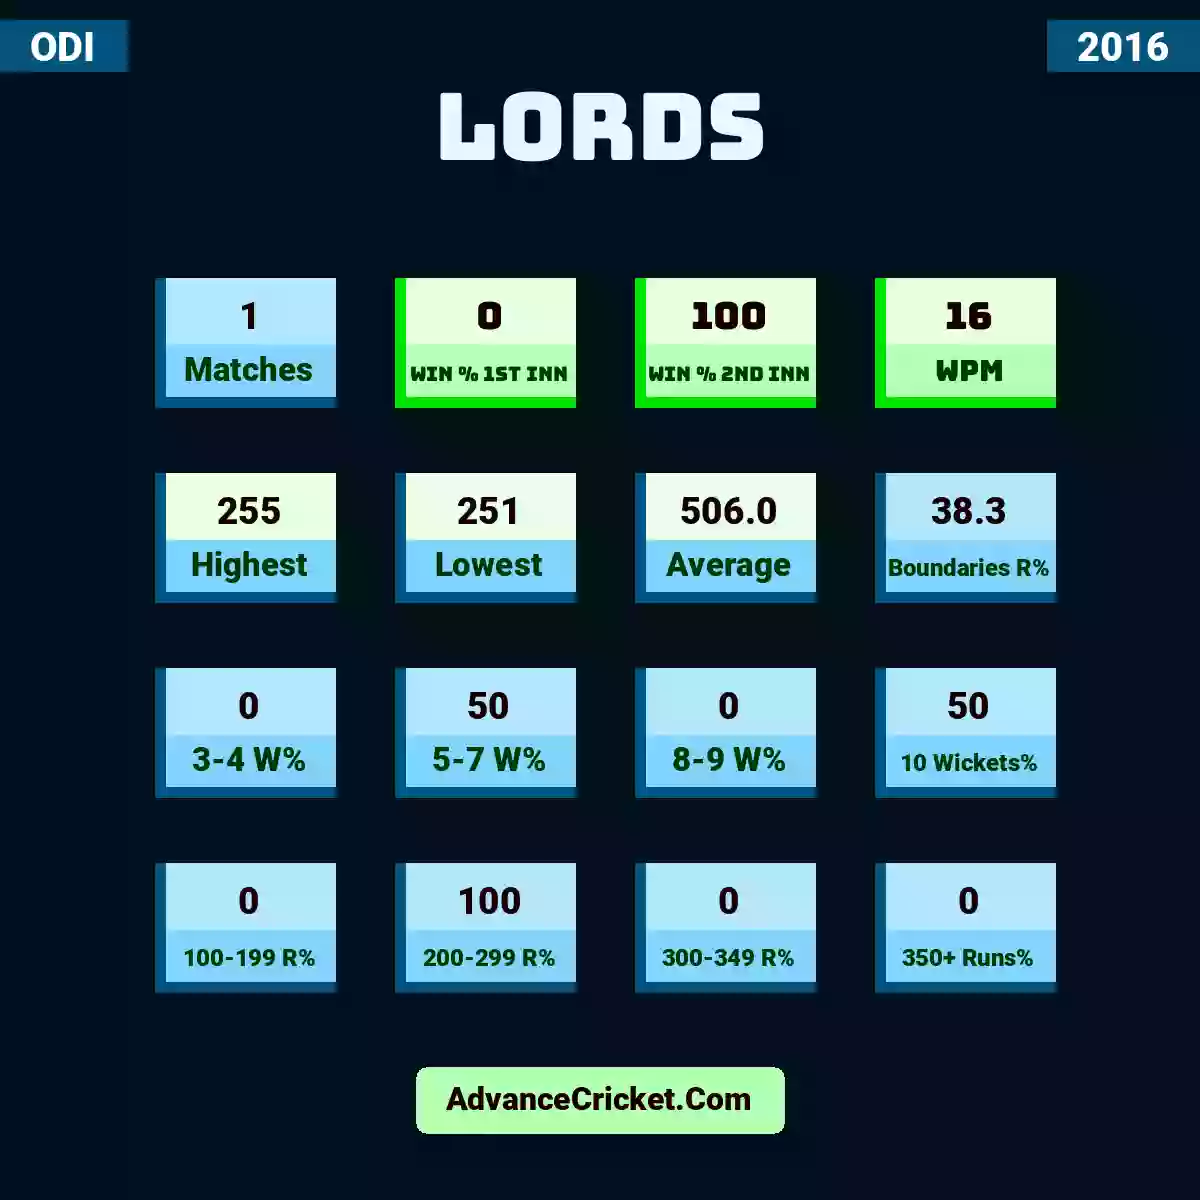 Image showing Lords with Matches: 1, Win % 1st Inn: 0, Win % 2nd Inn: 100, WPM: 16, Highest: 255, Lowest: 251, Average: 506.0, Boundaries R%: 38.3, 3-4 W%: 0, 5-7 W%: 50, 8-9 W%: 0, 10 Wickets%: 50, 100-199 R%: 0, 200-299 R%: 100, 300-349 R%: 0, 350+ Runs%: 0.